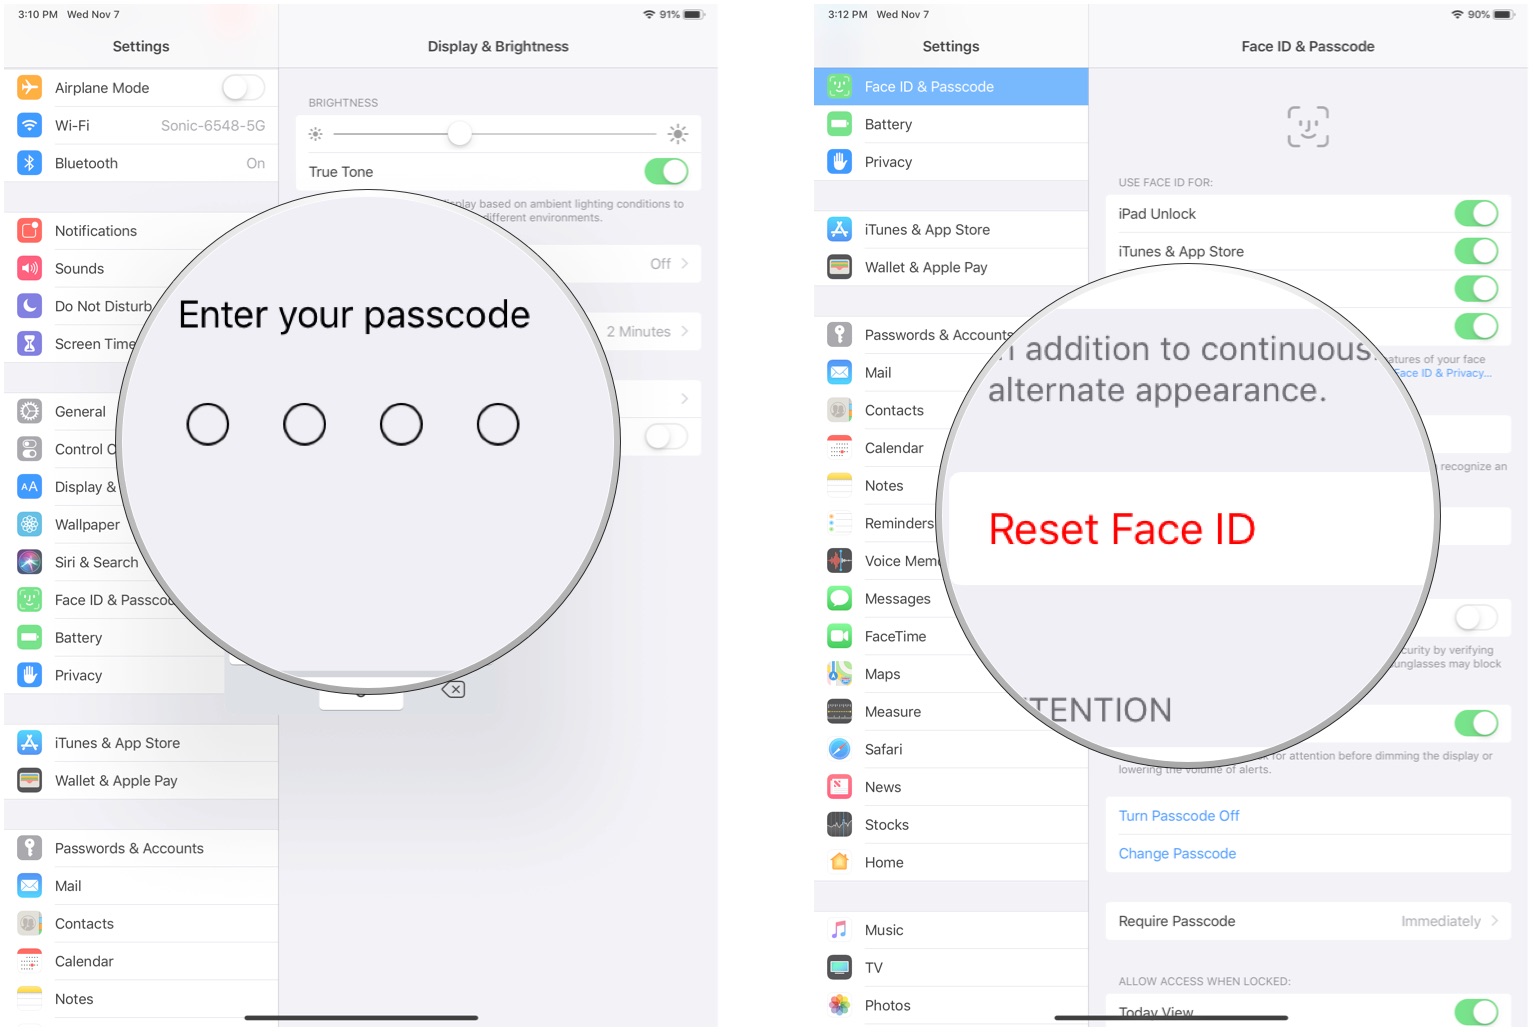 Reset Face ID on iPad Pro by showing: Enter your passcode, then tao Reset Face ID